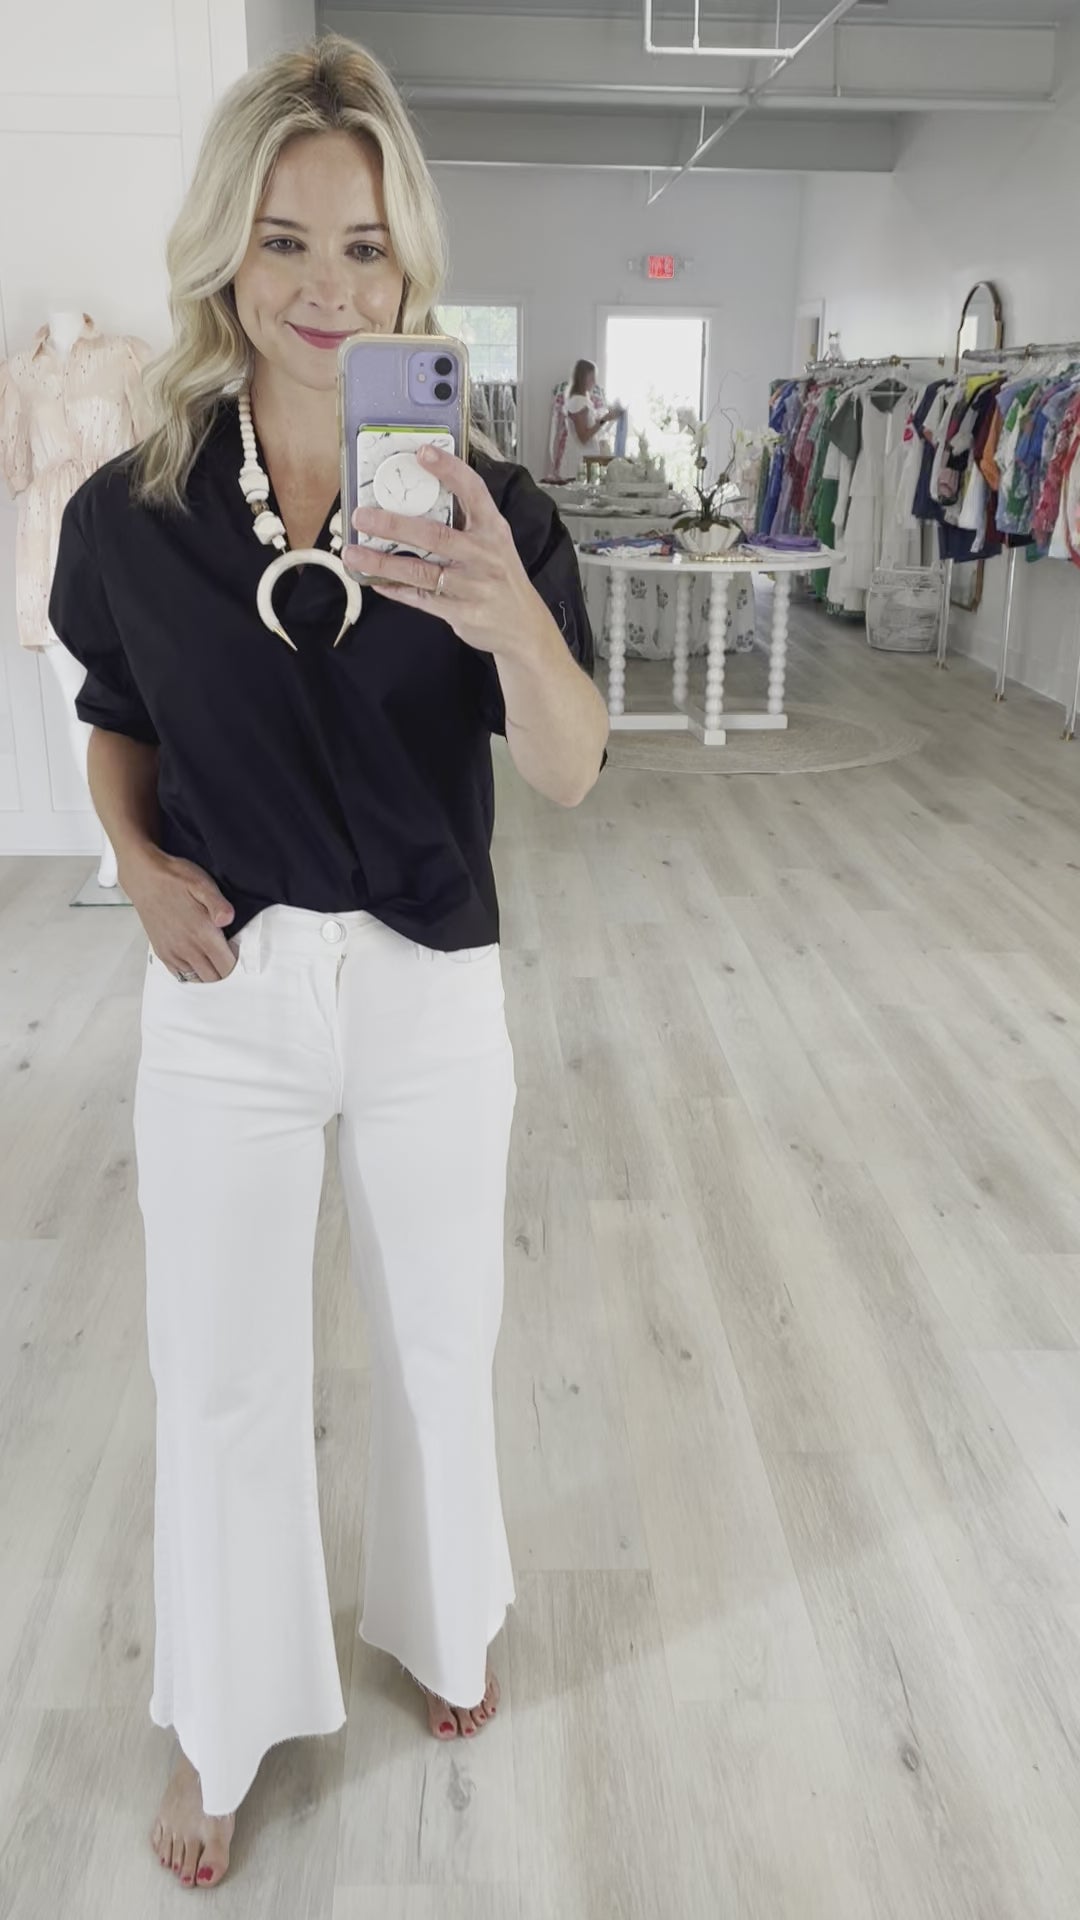 Le Palazzo Crop In White By Frame